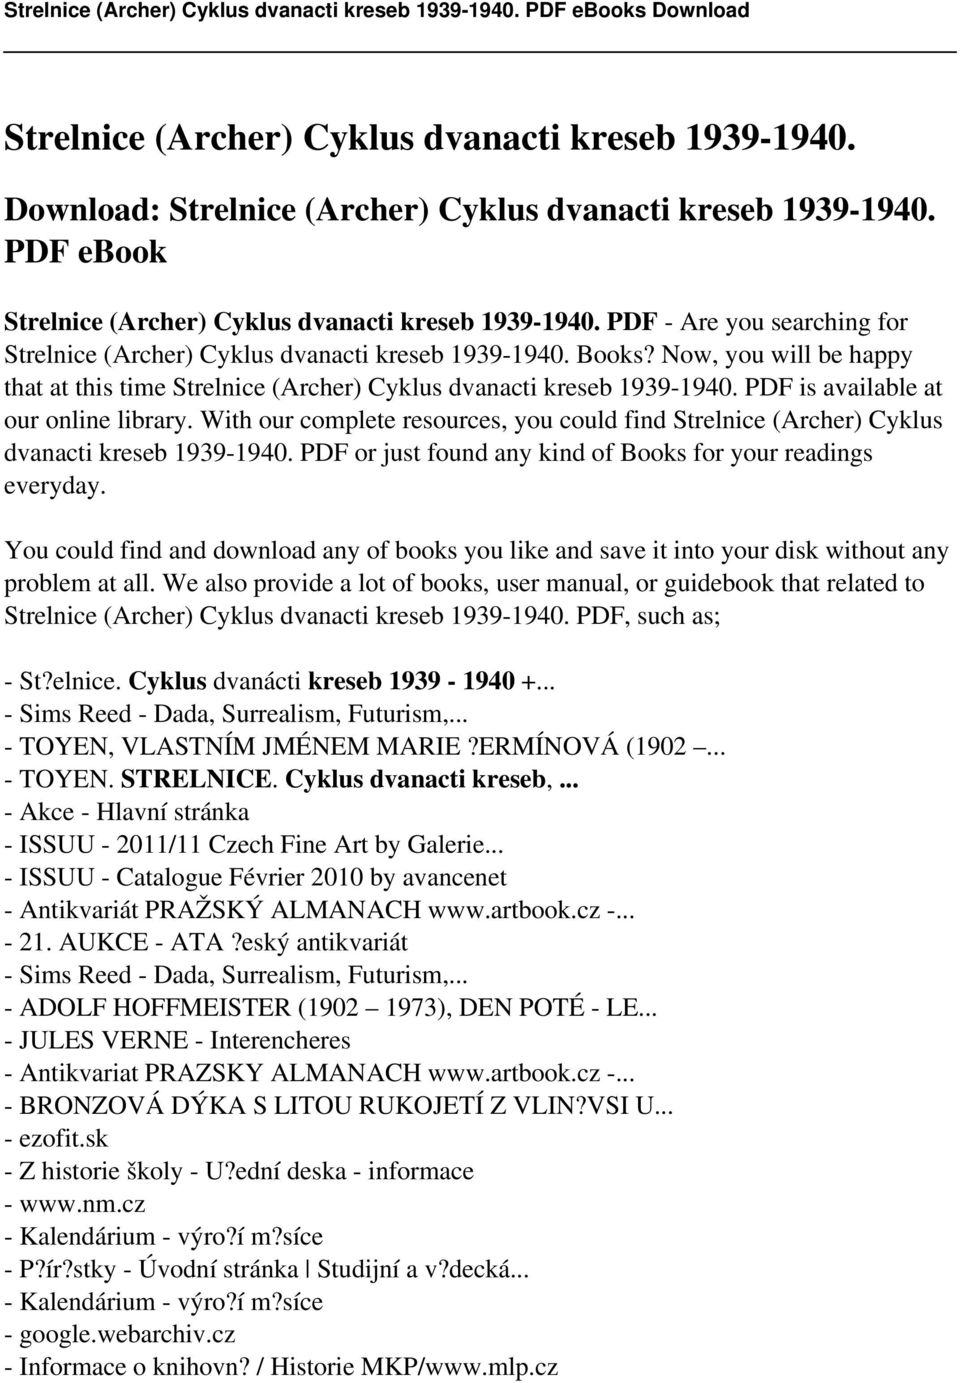 PDF is available at our online library. With our complete resources, you could find Strelnice (Archer) Cyklus dvanacti kreseb 1939-1940. PDF or just found any kind of Books for your readings everyday.